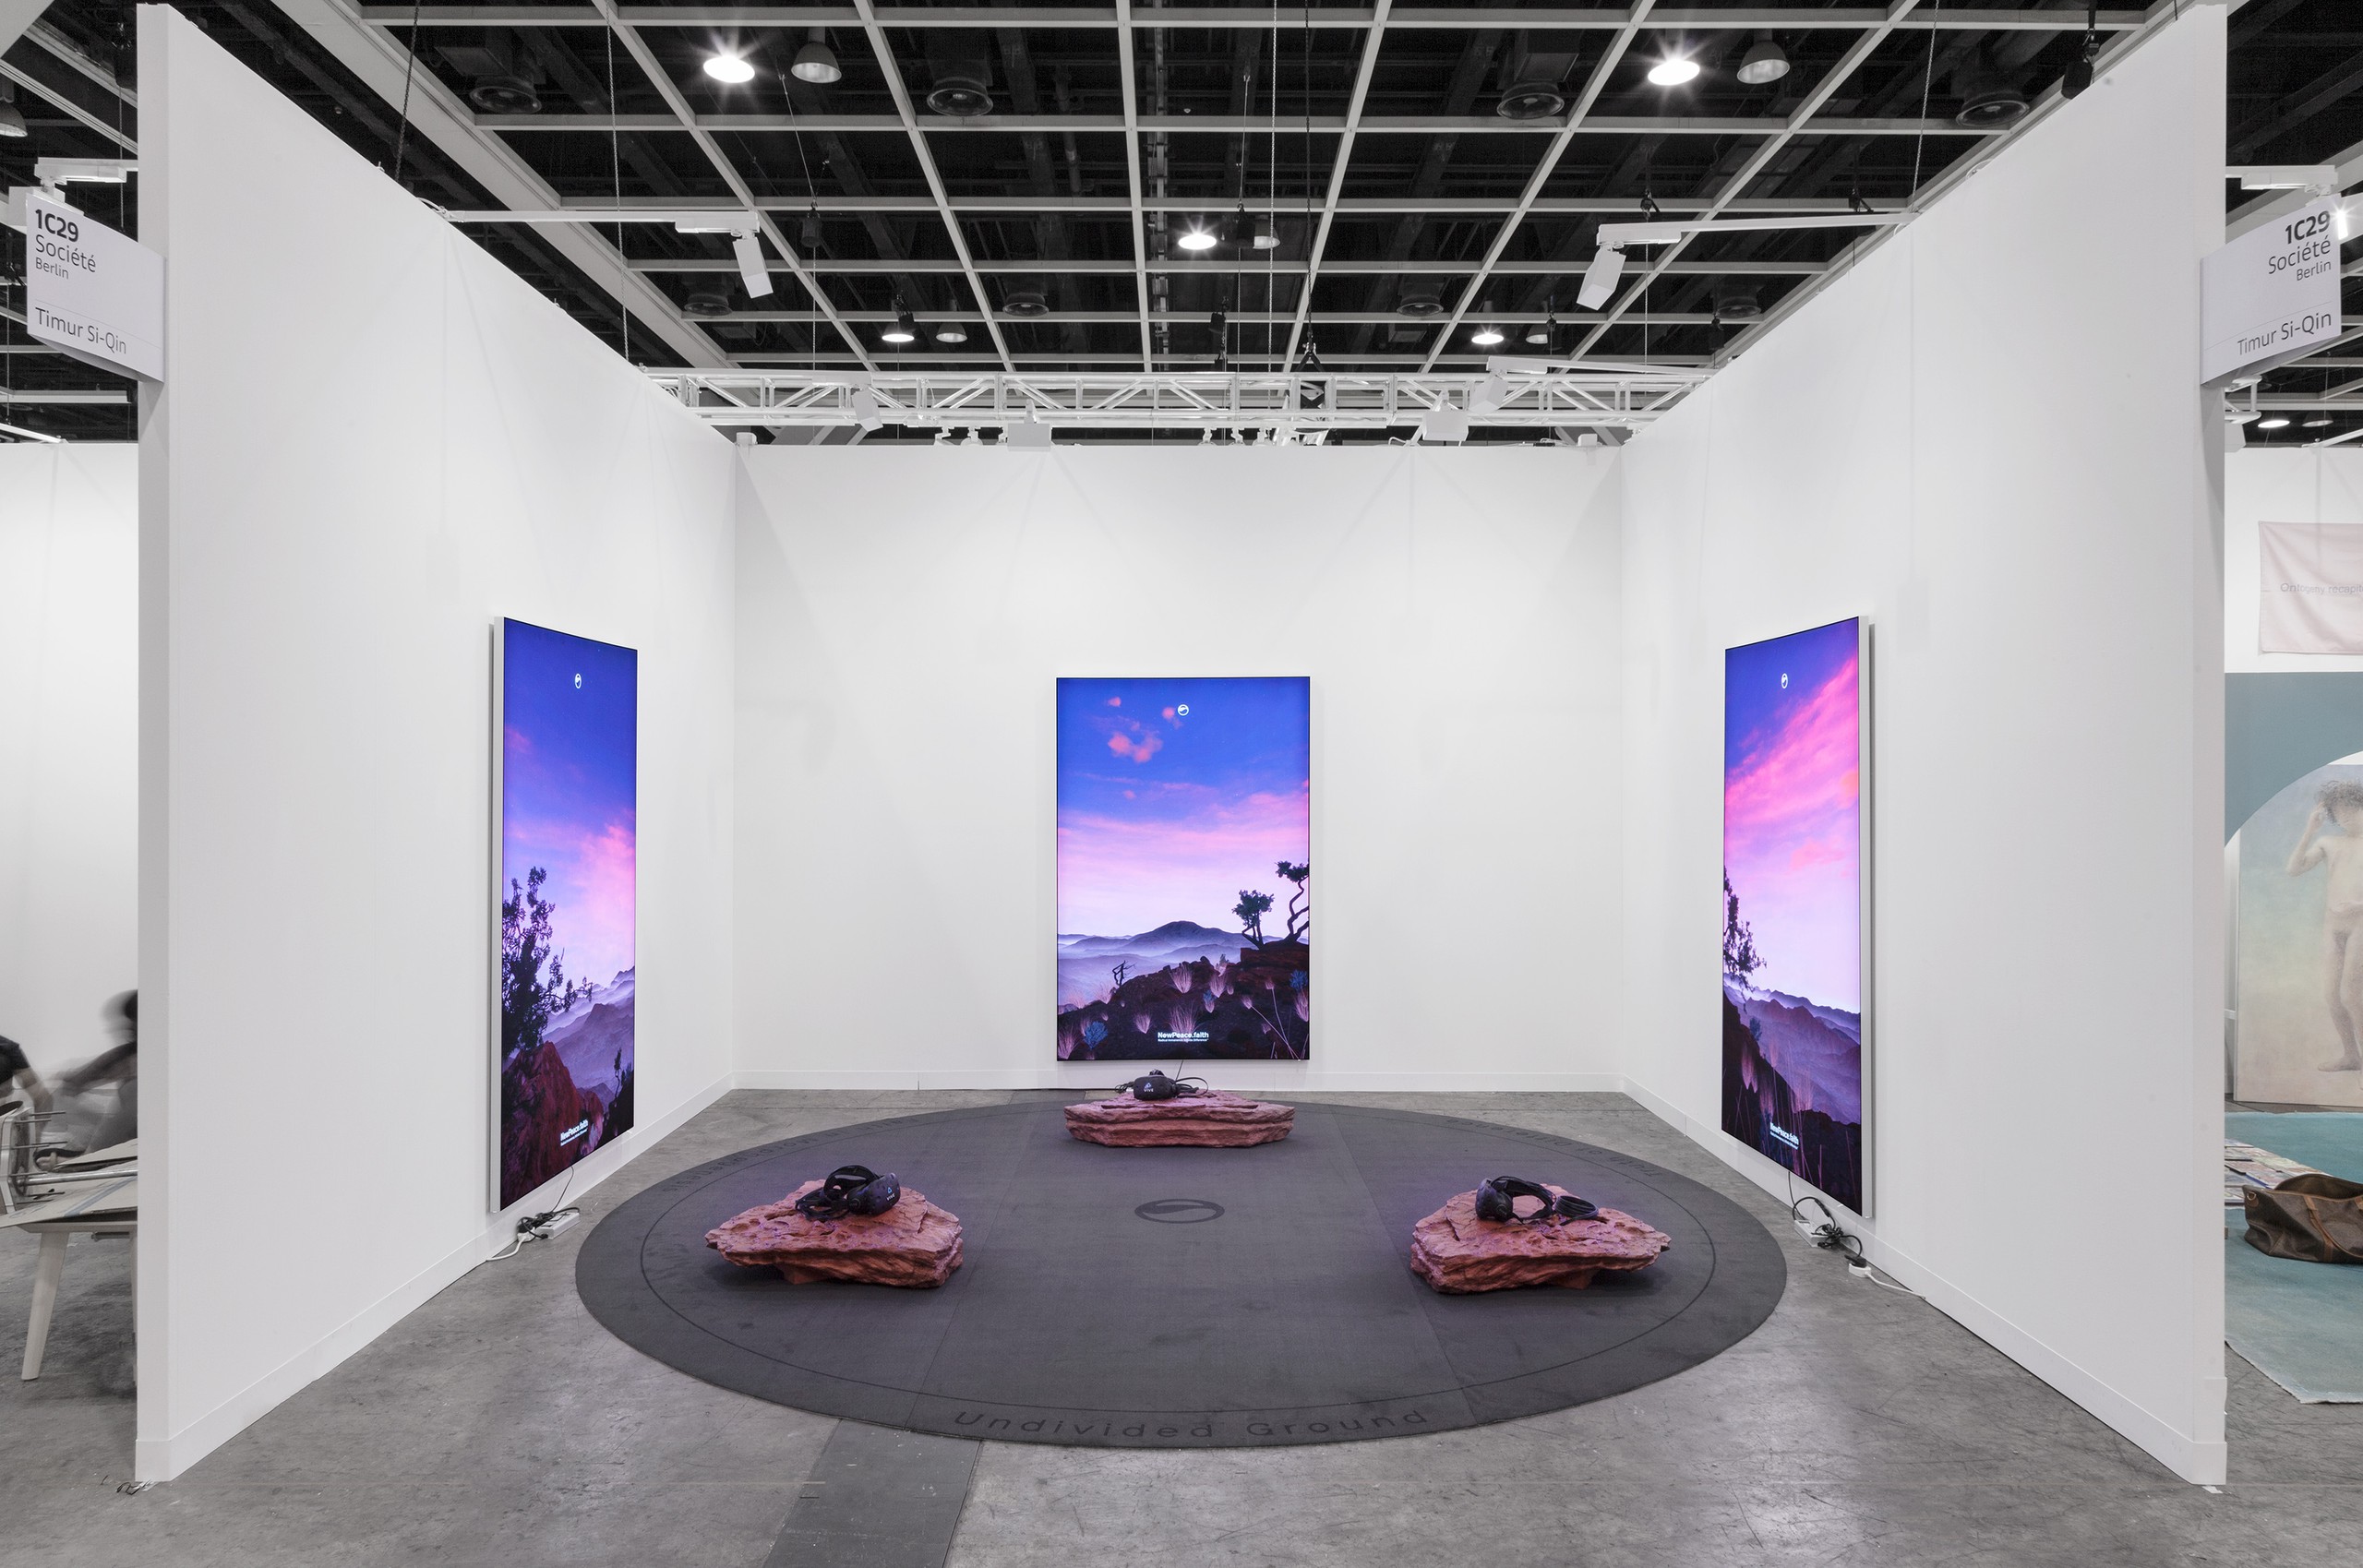 Installation view, Campaign for a New Protocol, Part II, Art Basel Hong Kong under the auspices of Société, Hong Kong, 2018